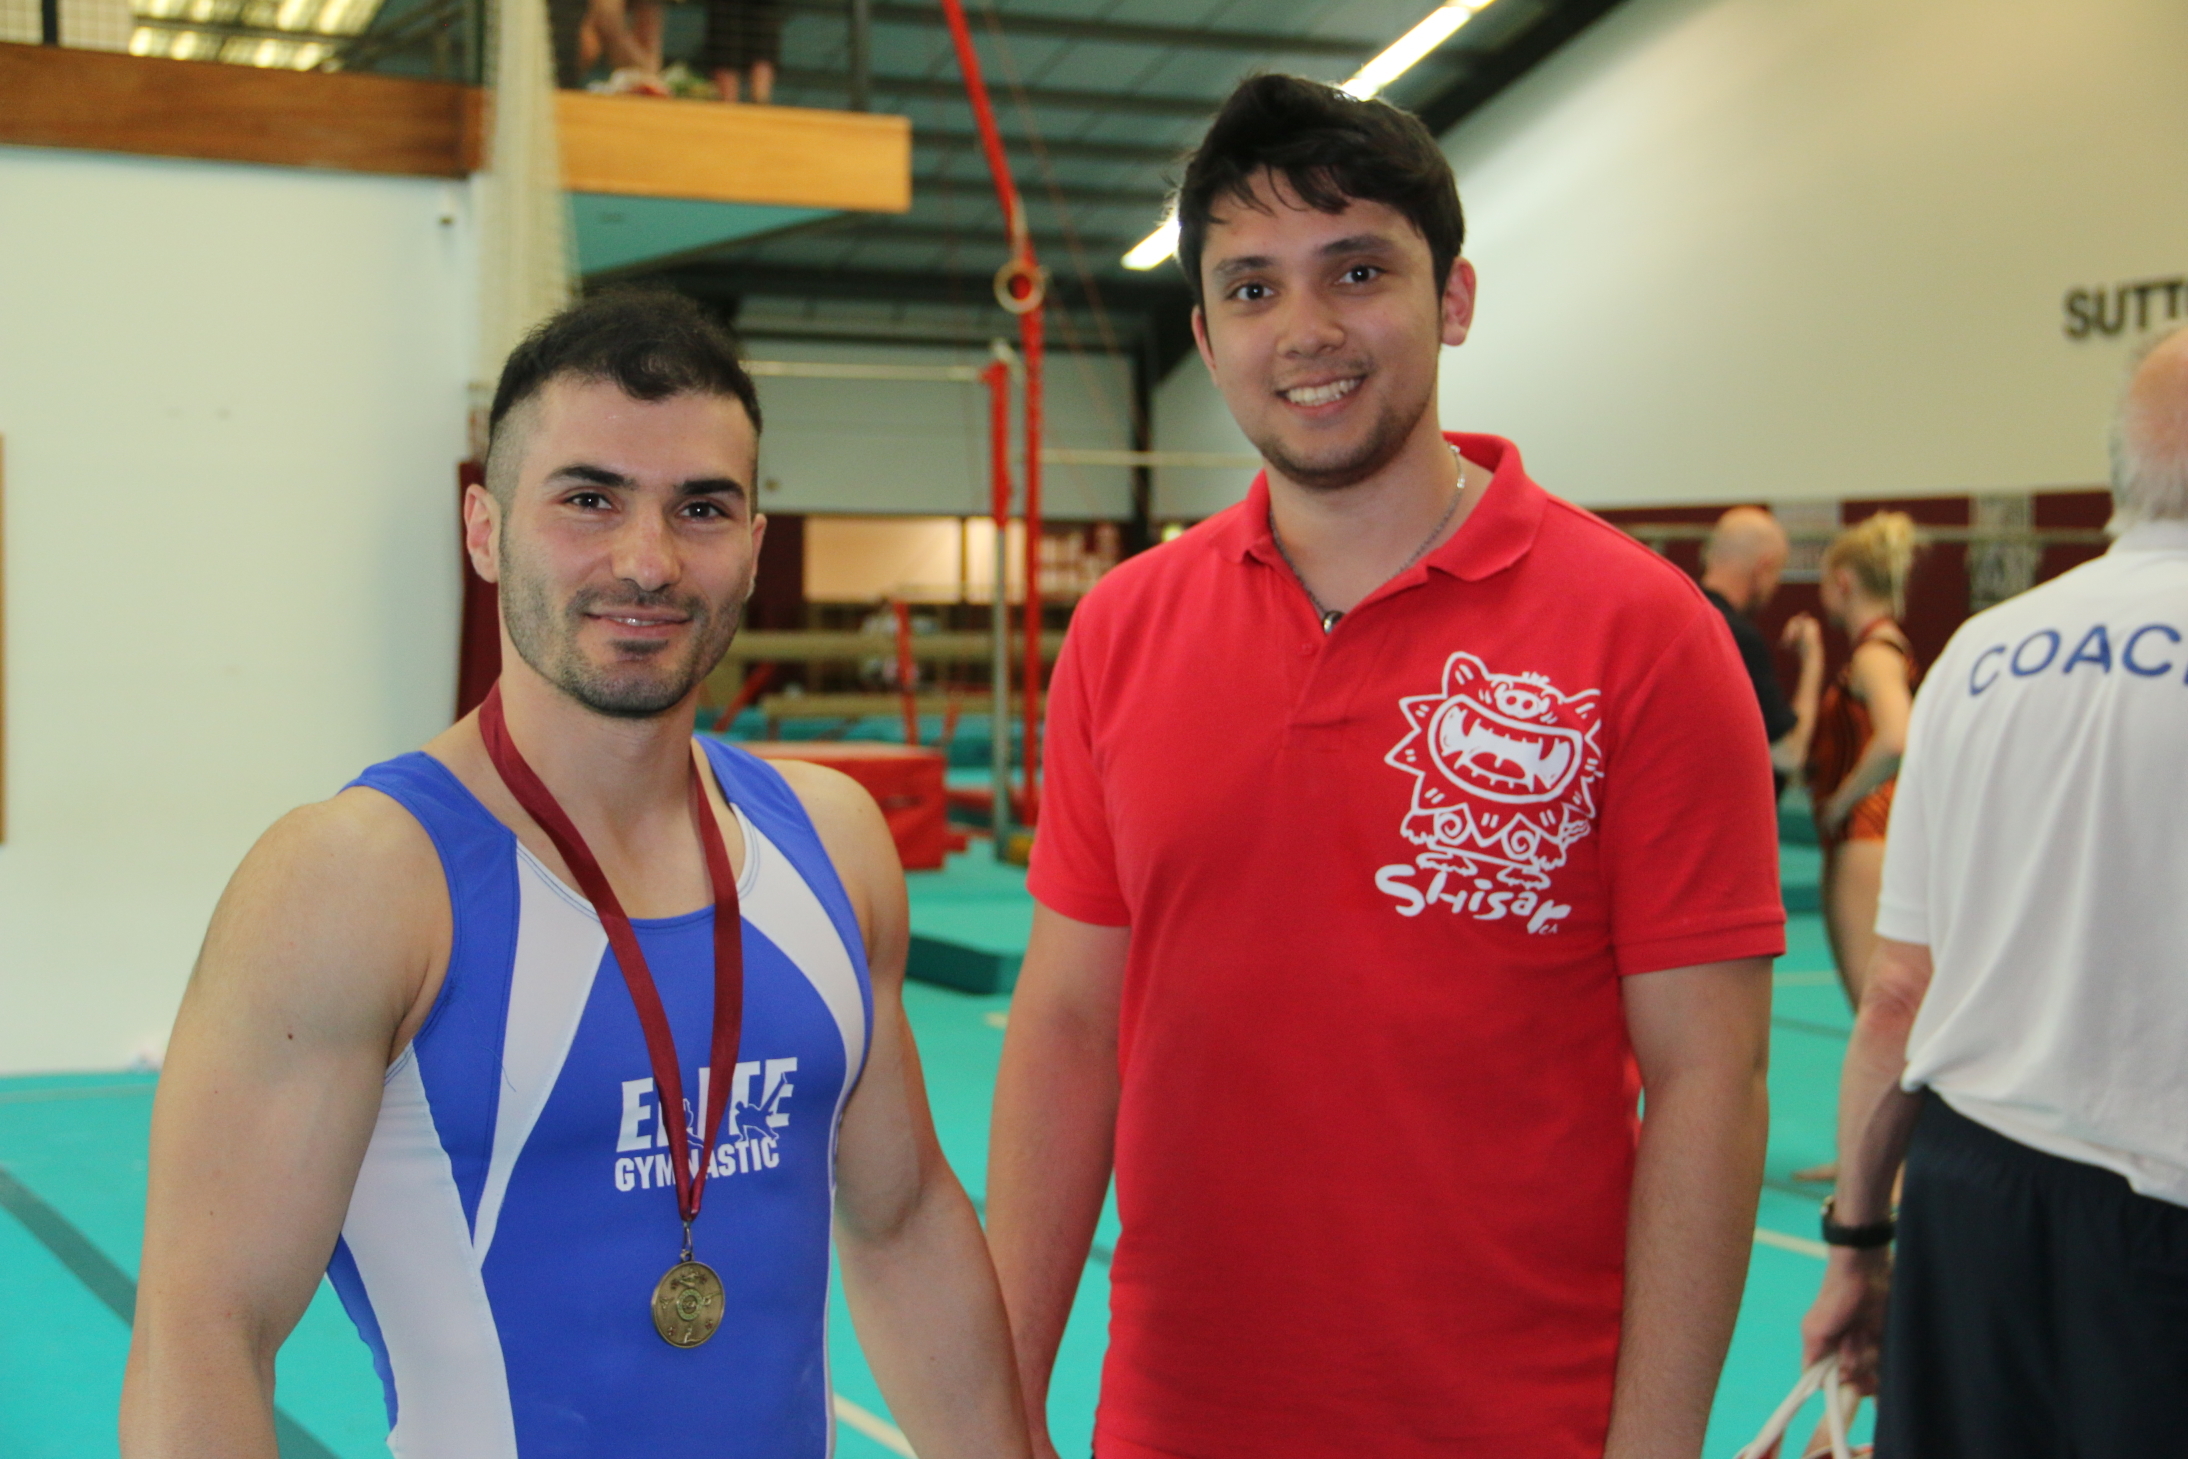 Stefan Kolimechkov and Damon DuCasse at the Sutton Gymnastics Academy Adults Competition 2016